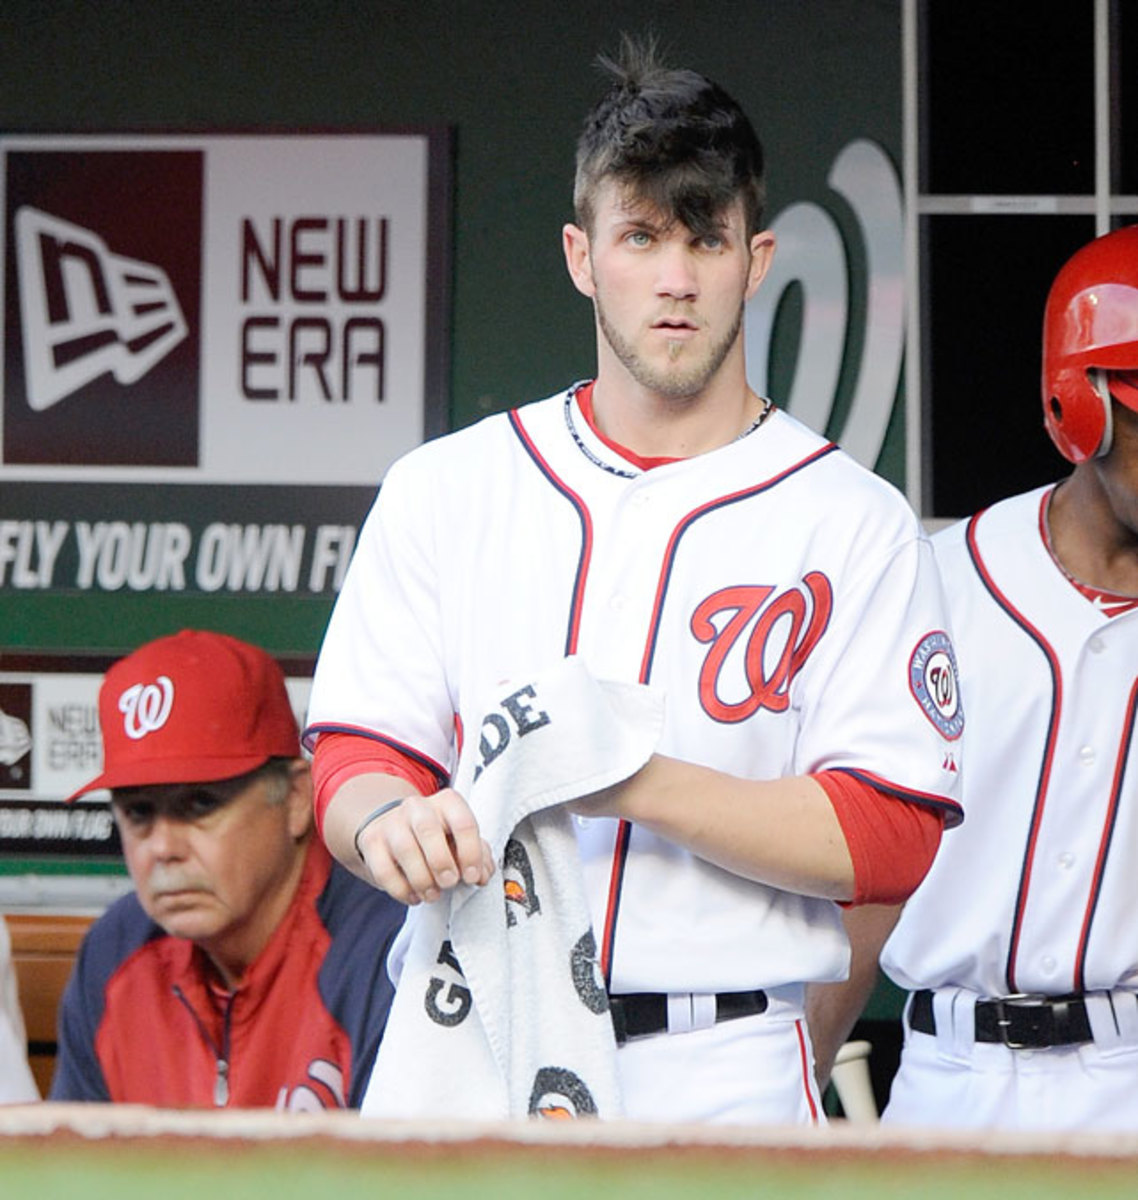 Can Bryce Harper Make it to the Majors? - SI Kids: Sports News for